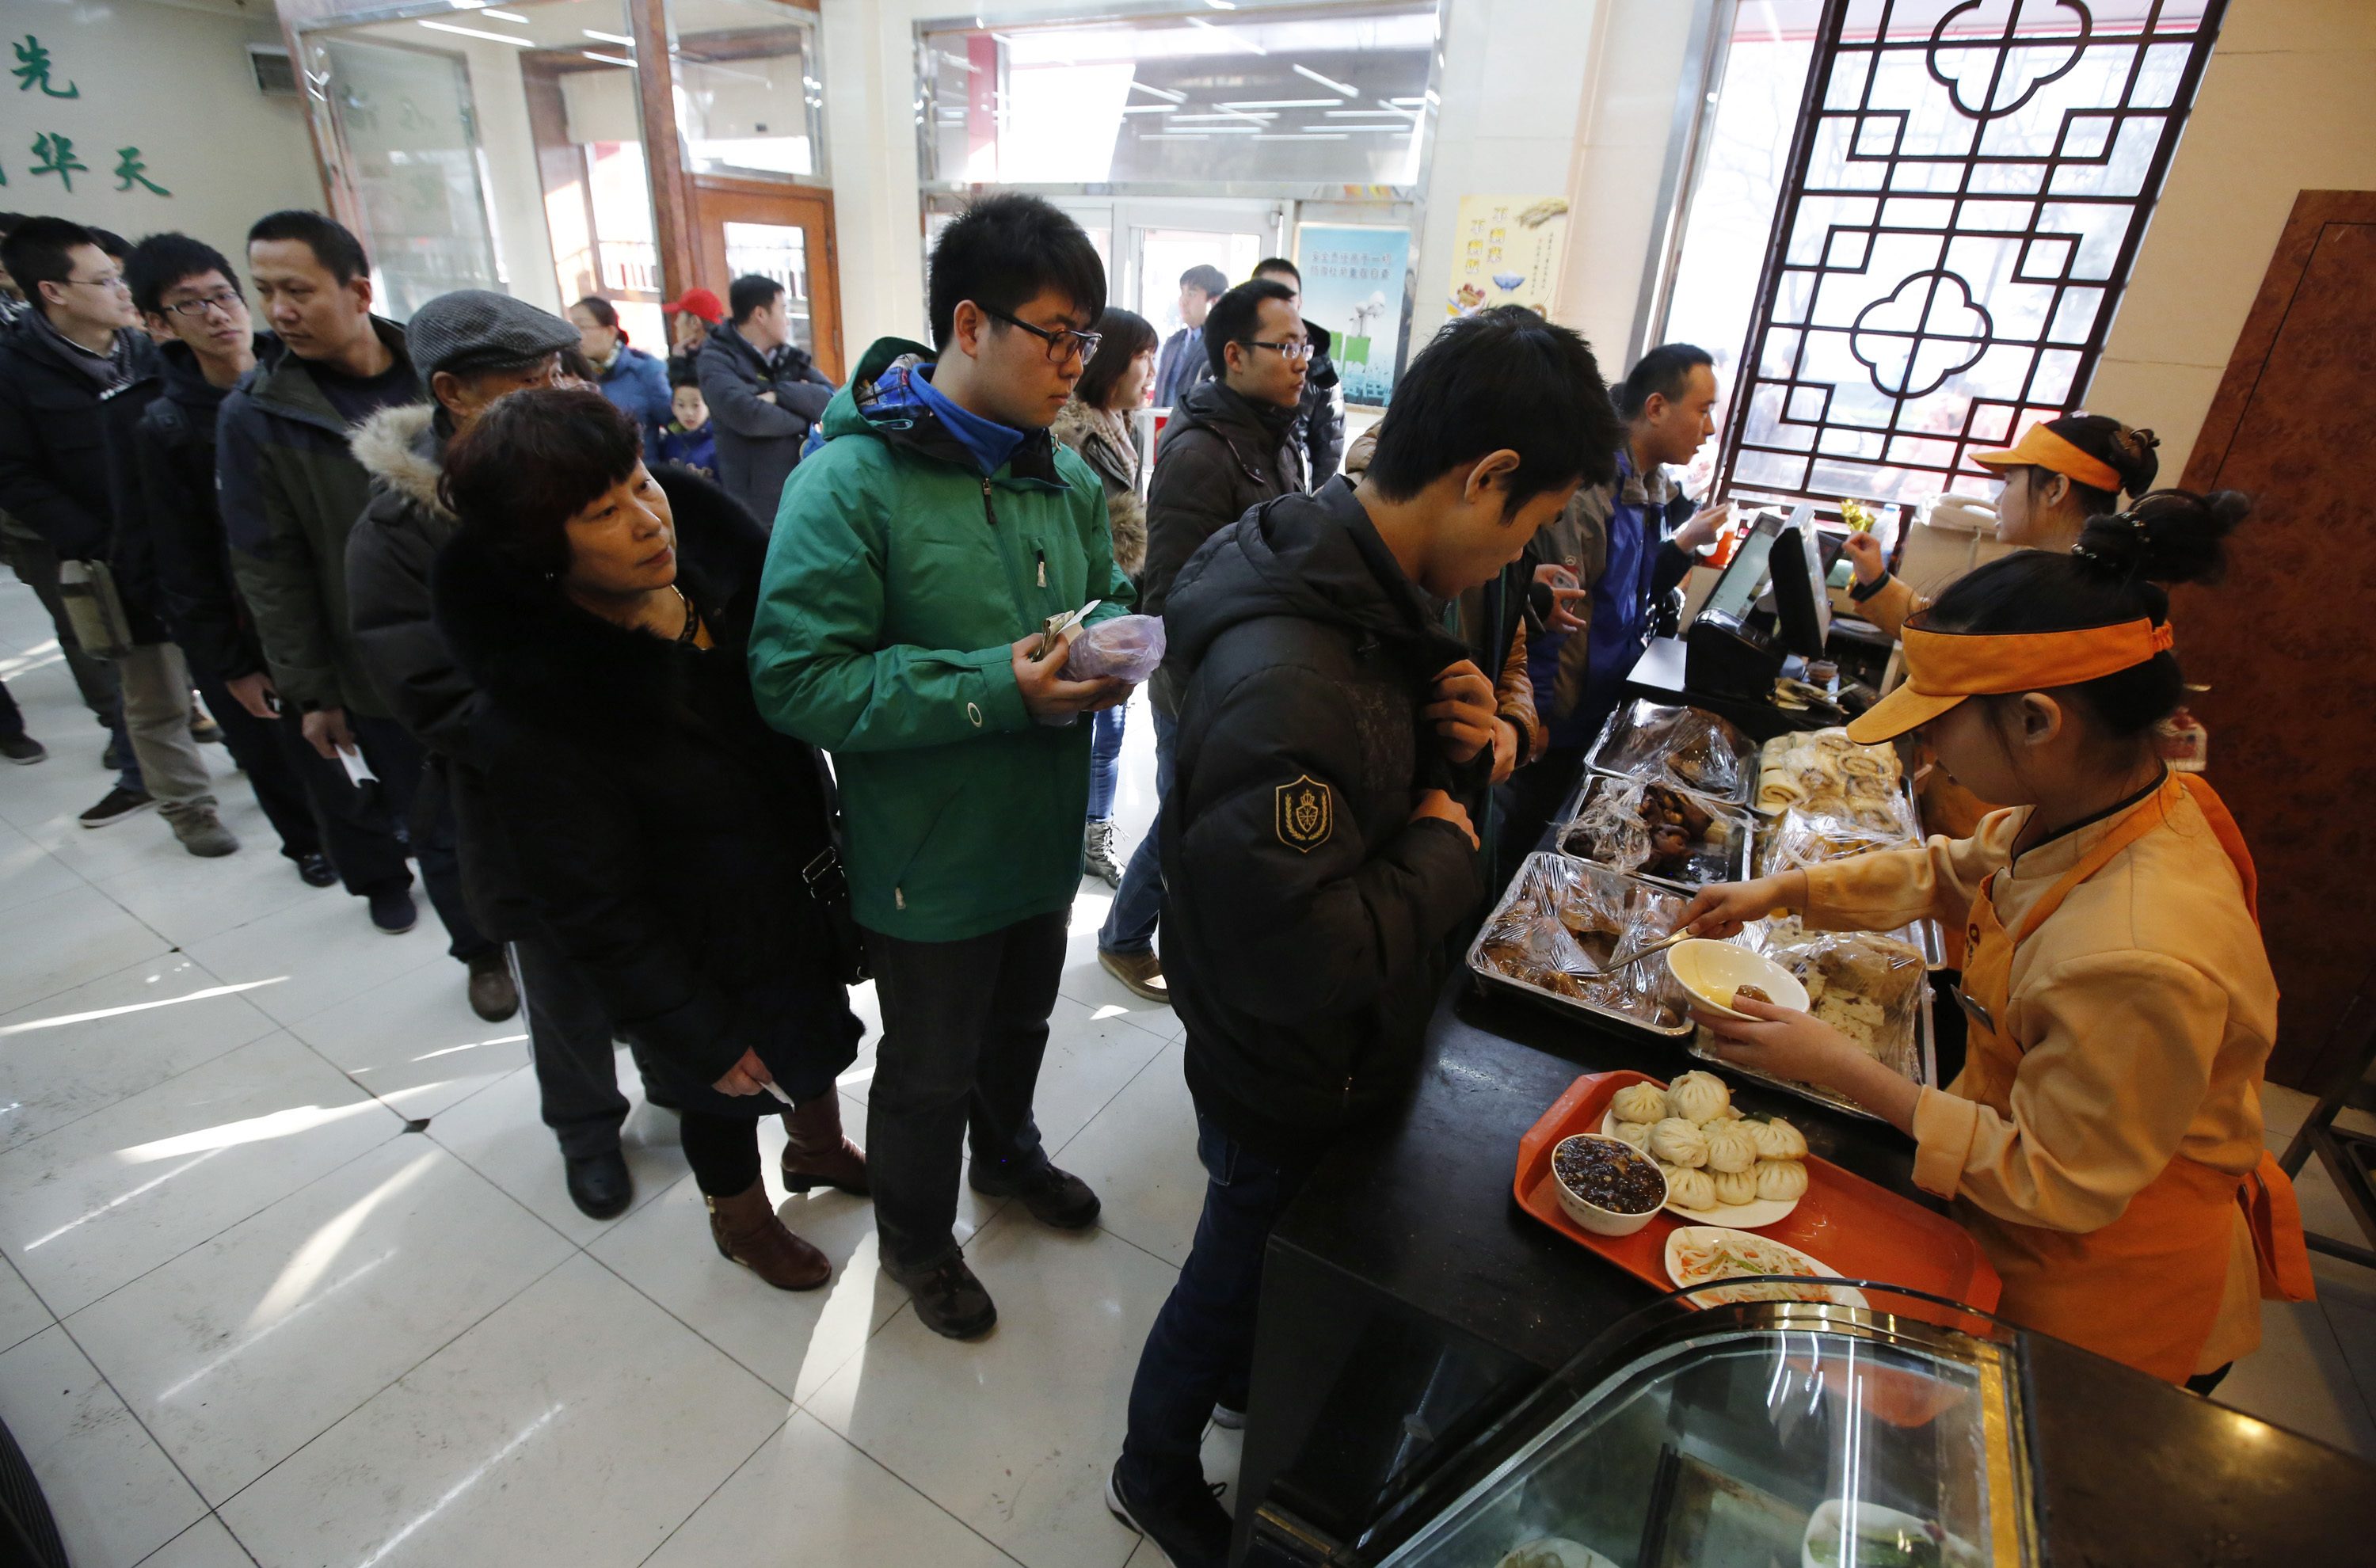 Customers line up to buy steamed buns which Chinese President Xi ate on Saturday, at the Qing-Feng steamed buns restaurant in Beijing